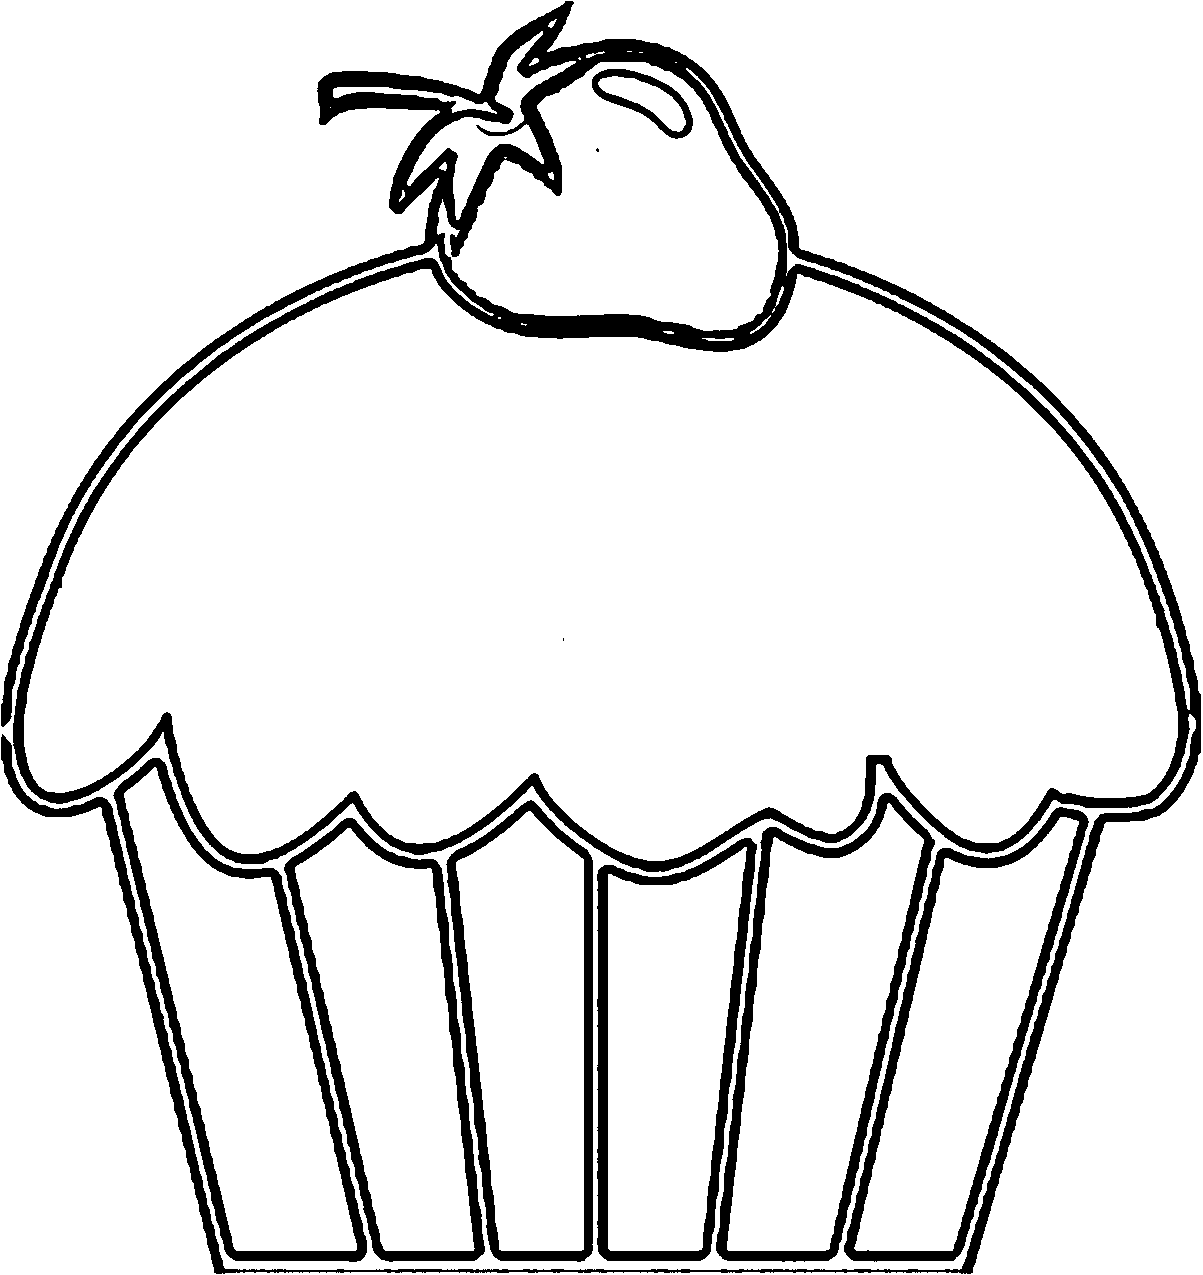 Cupcake Cup Cake Coloring Page 22 | Wecoloringpage